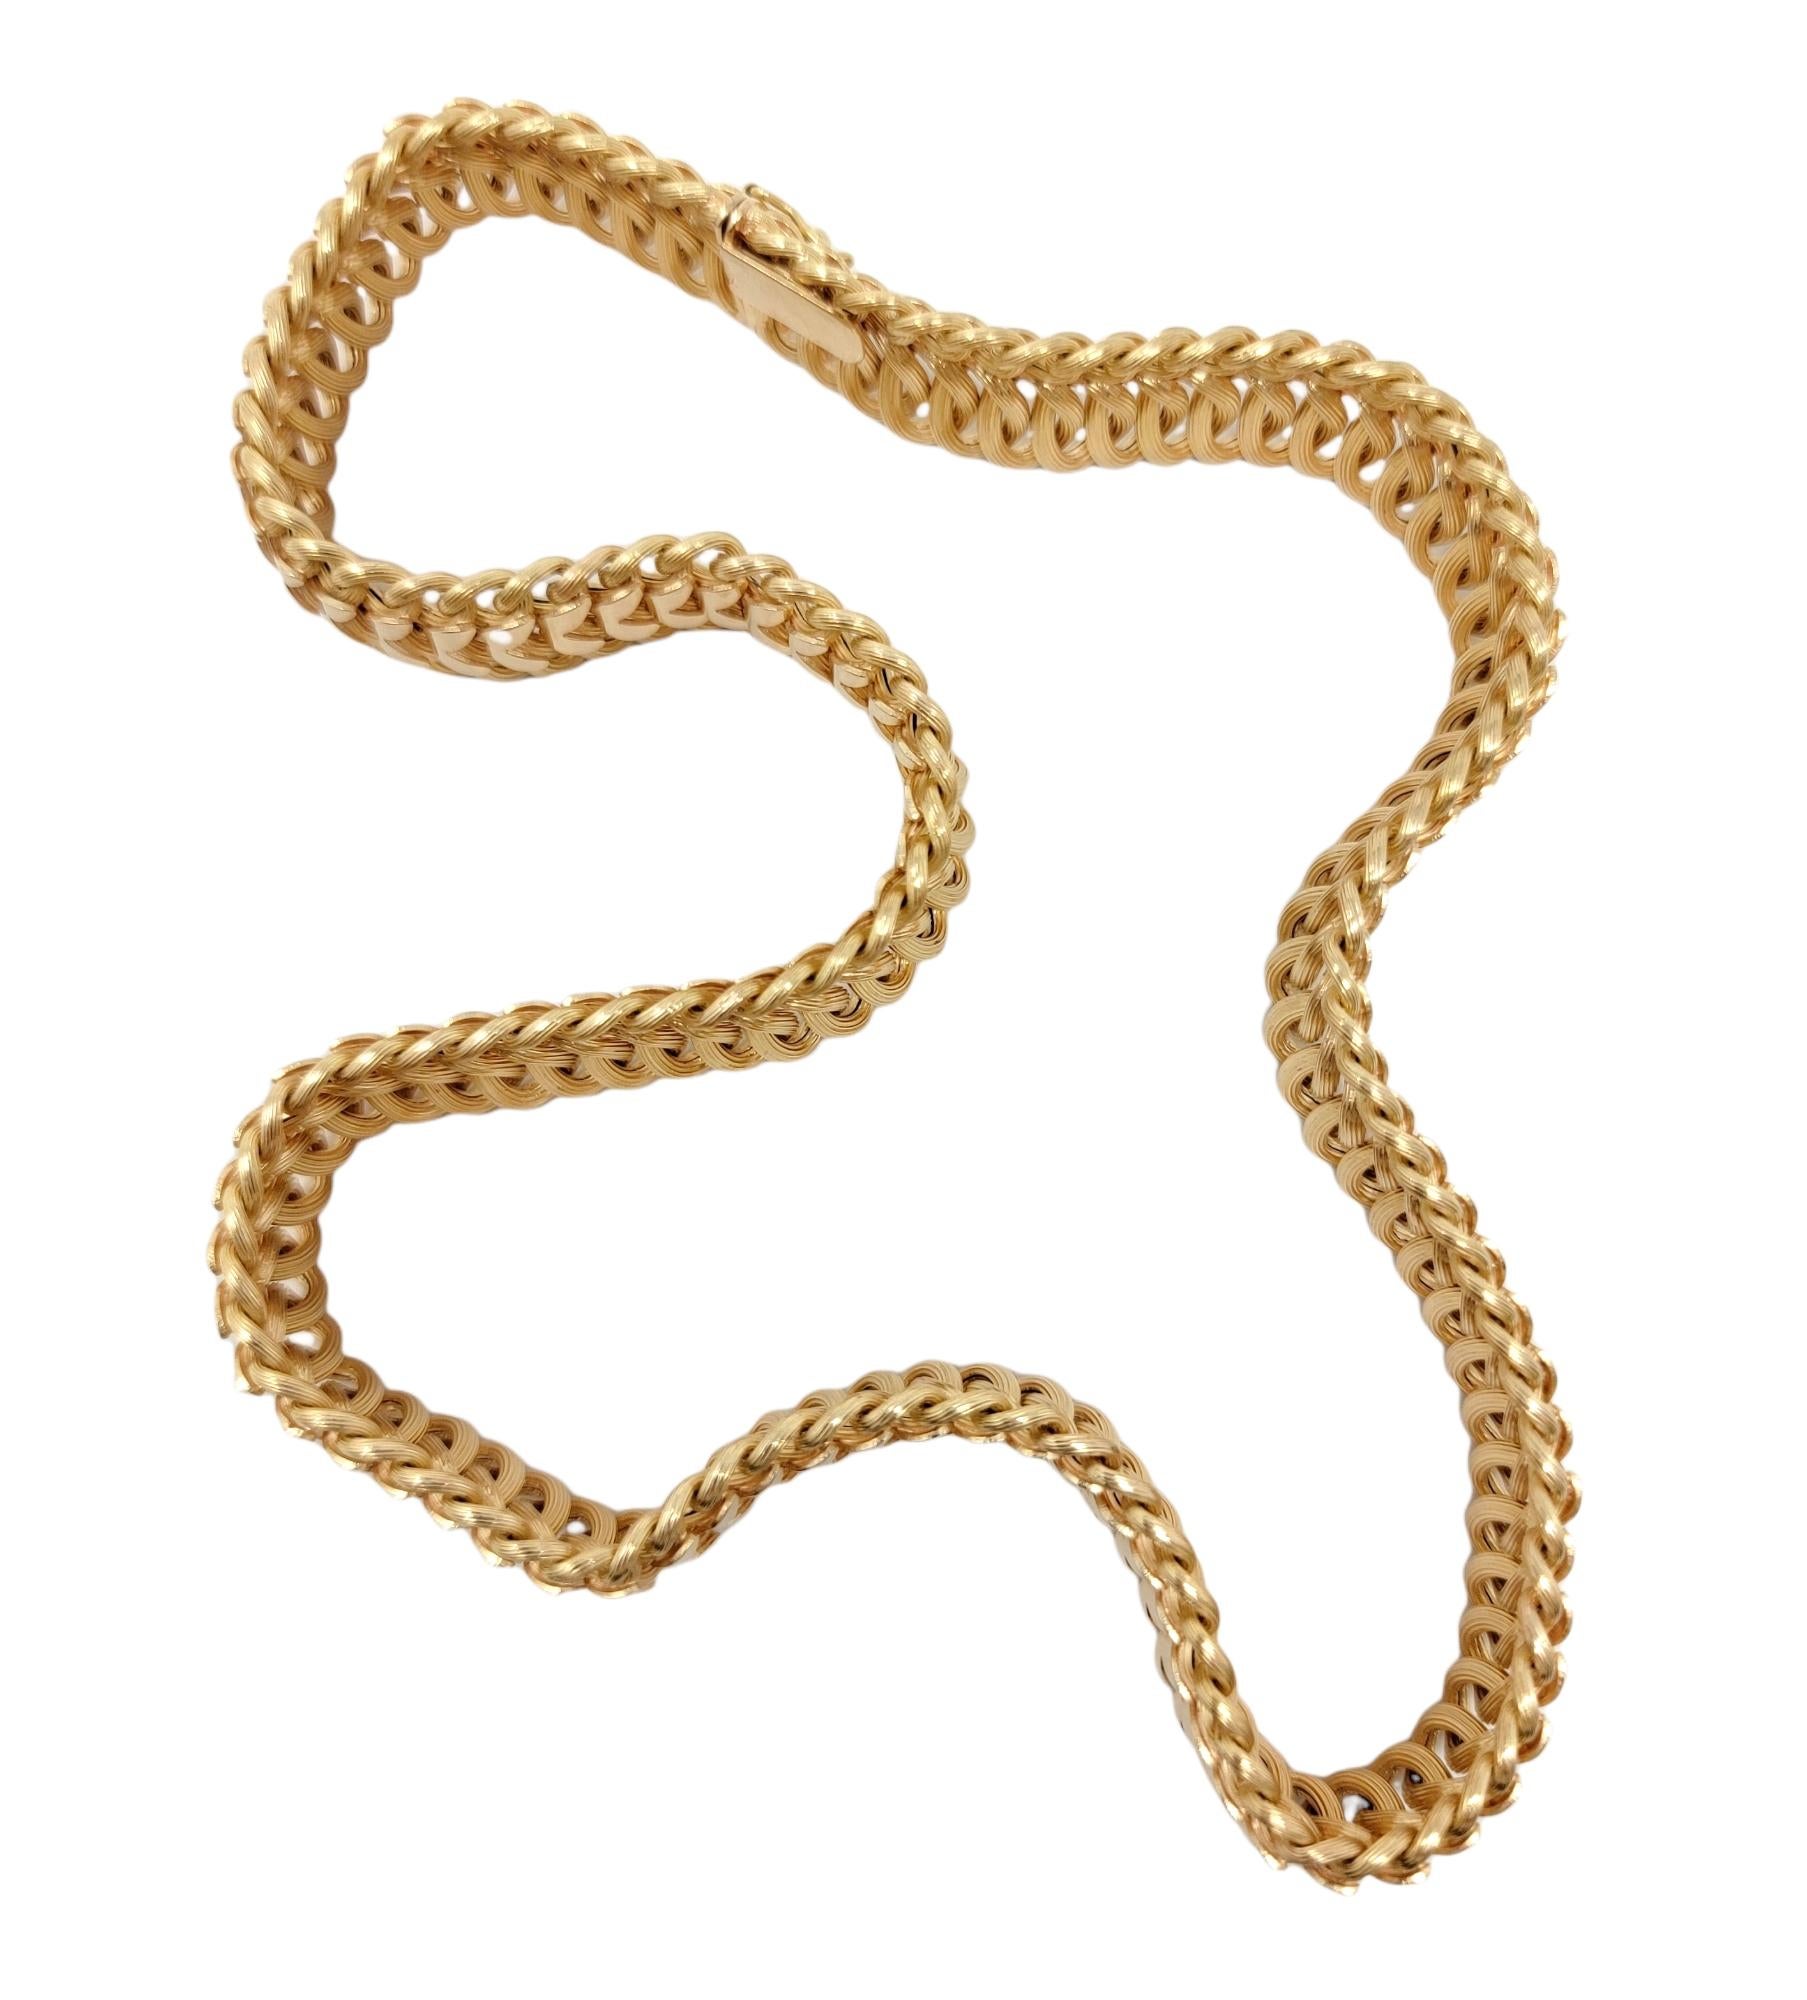 Finely Ridged and Polished 18 Karat Yellow Gold Woven Link Necklace In Good Condition For Sale In Scottsdale, AZ